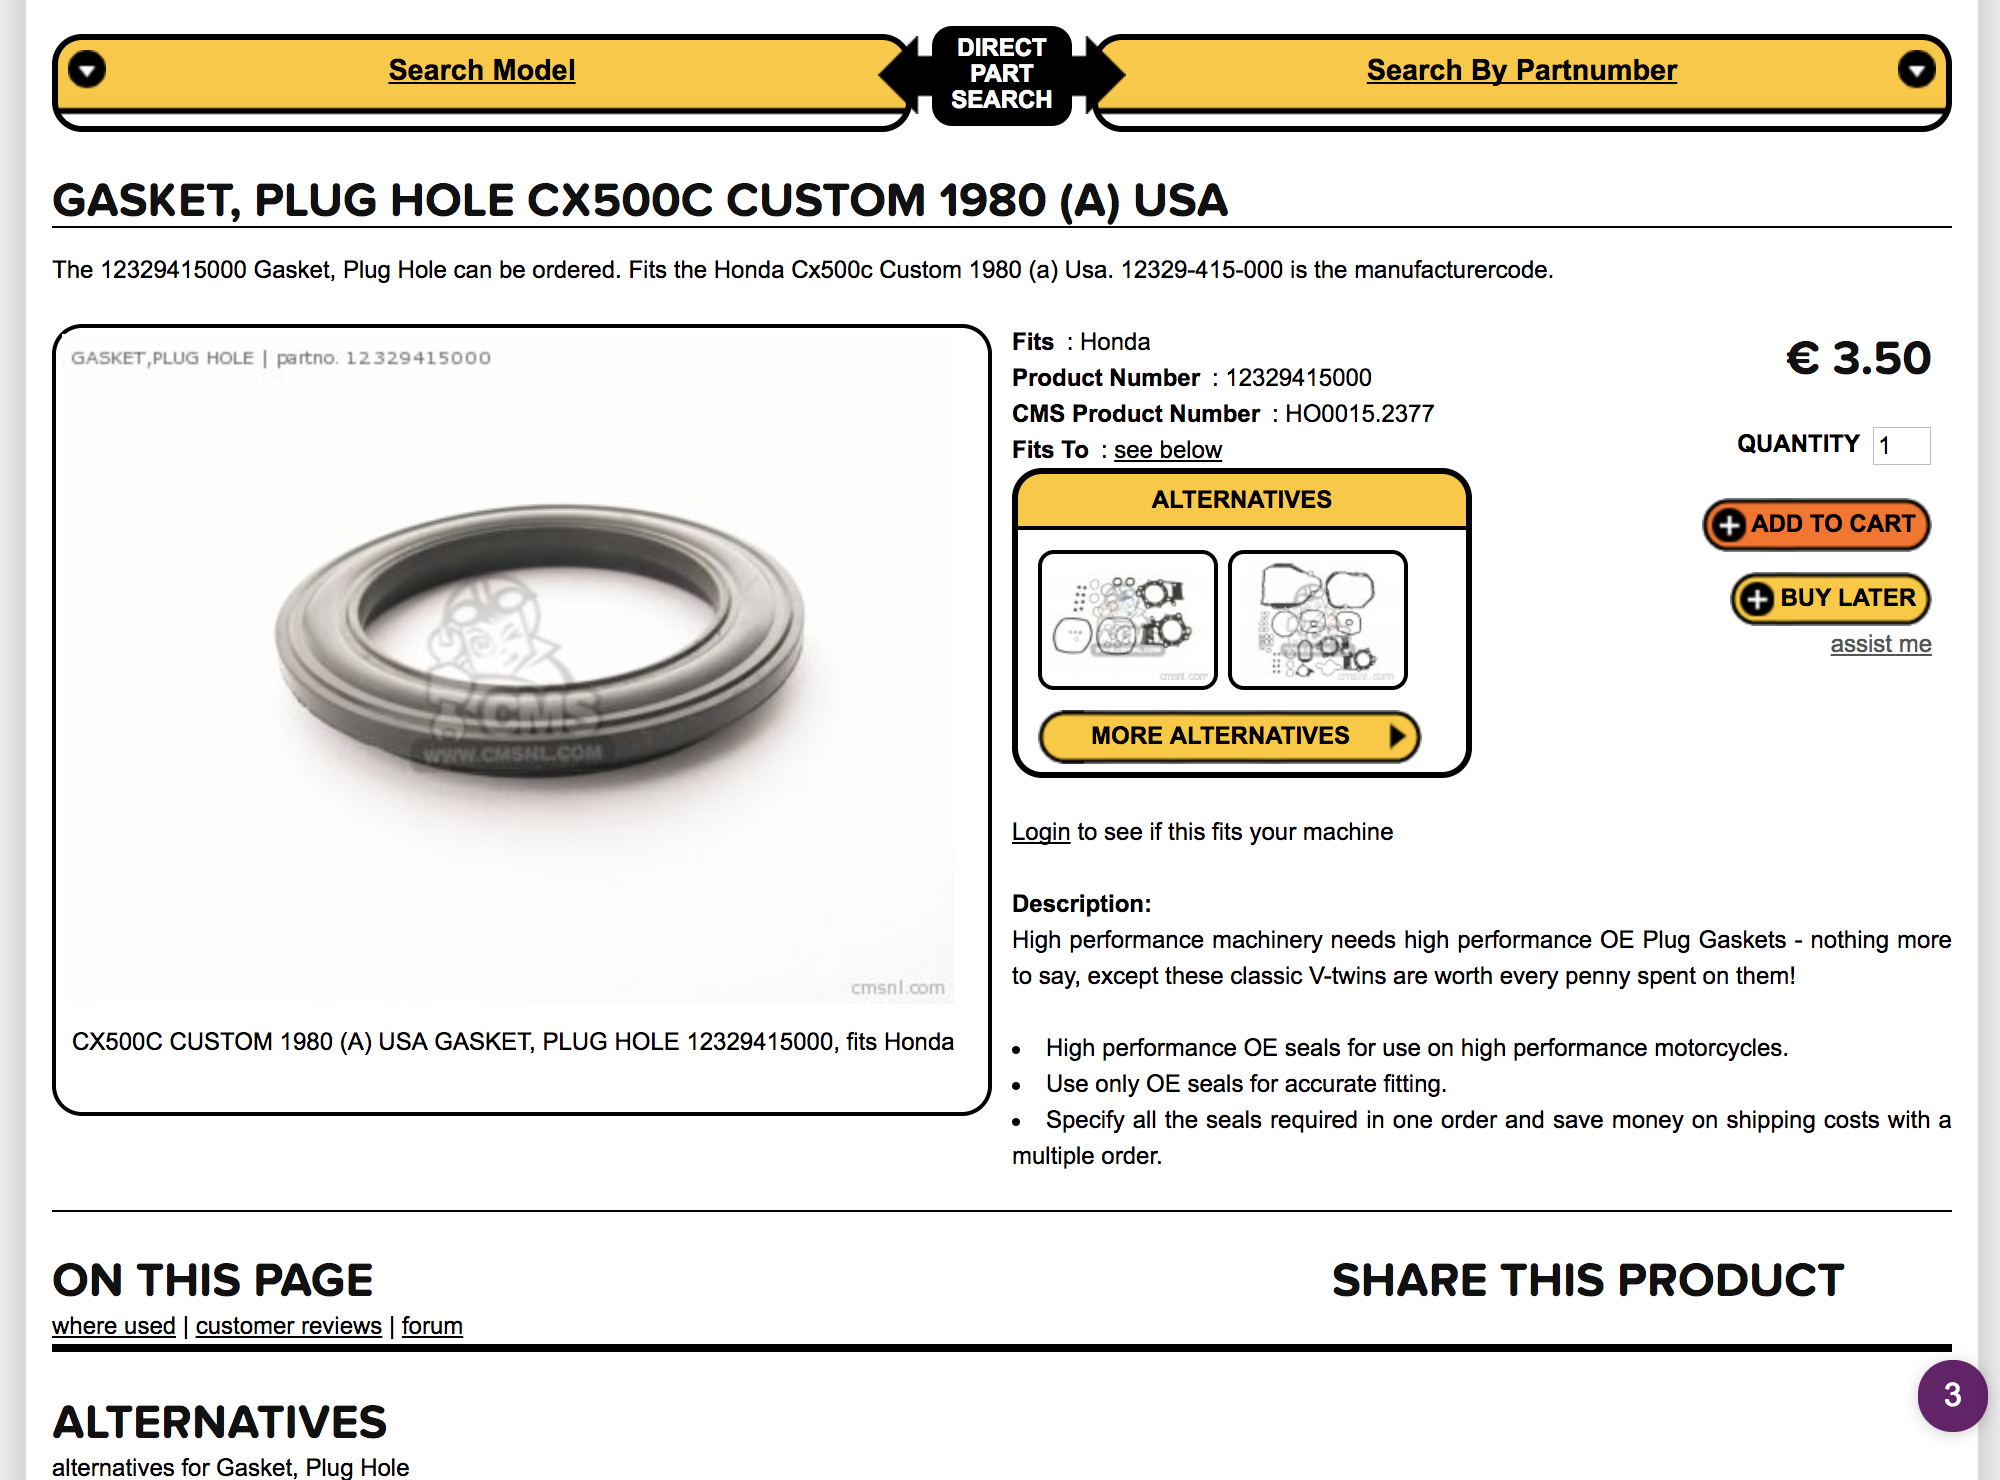 Here's how to find parts for your vintage motorcycle using the CMSNL website.